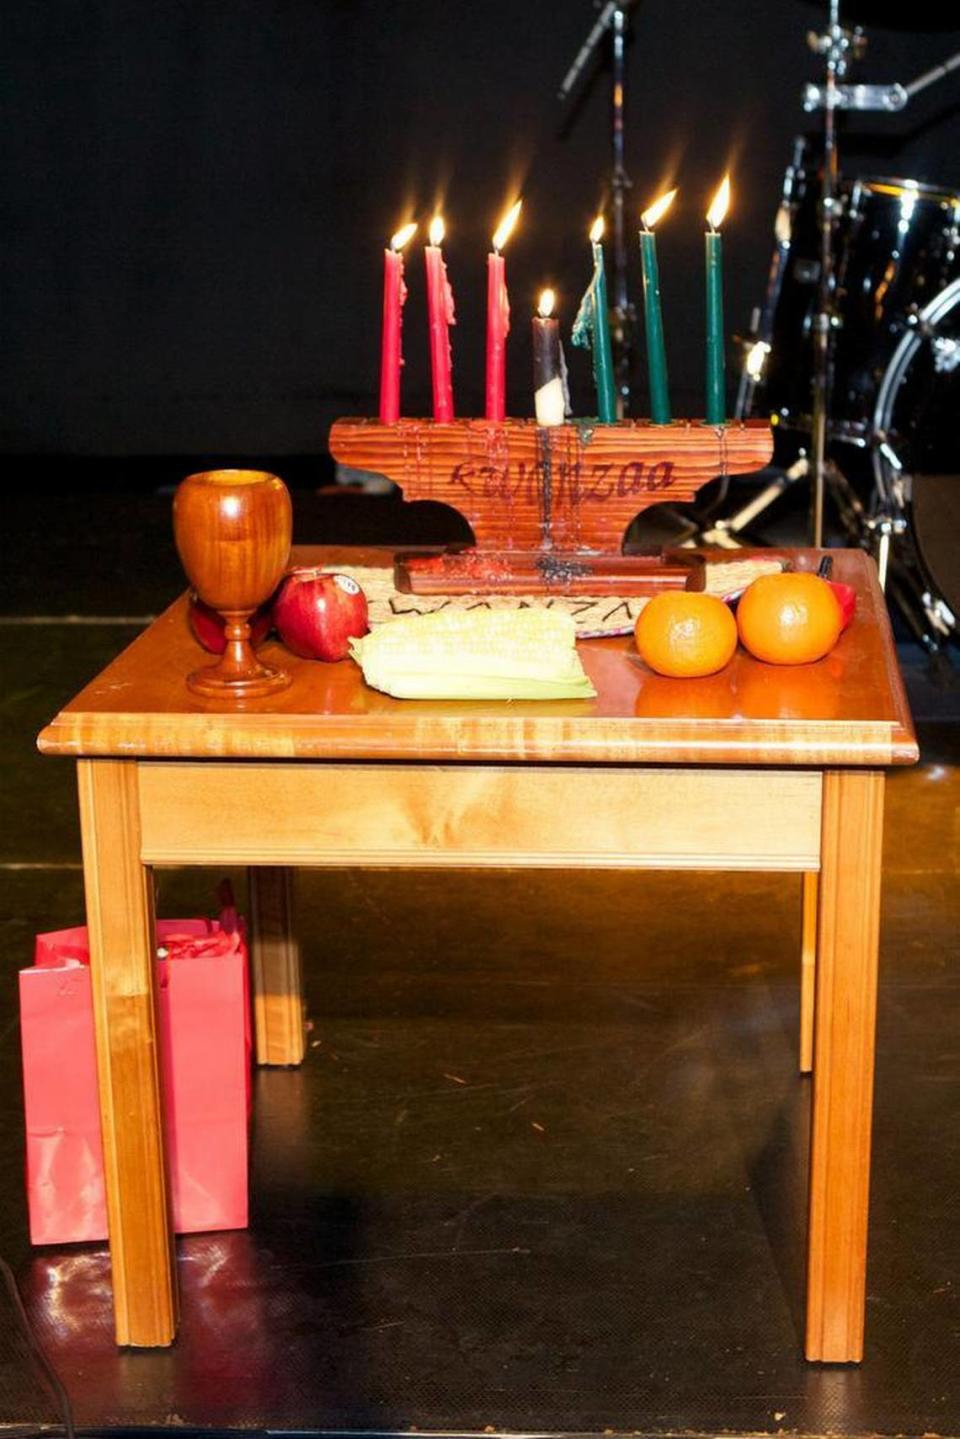 Kwanzaa is celebrated from Dec. 26 to Jan. 1. Here is atable set up for 2011 celebration at the African Heritage Cultural Arts Center.